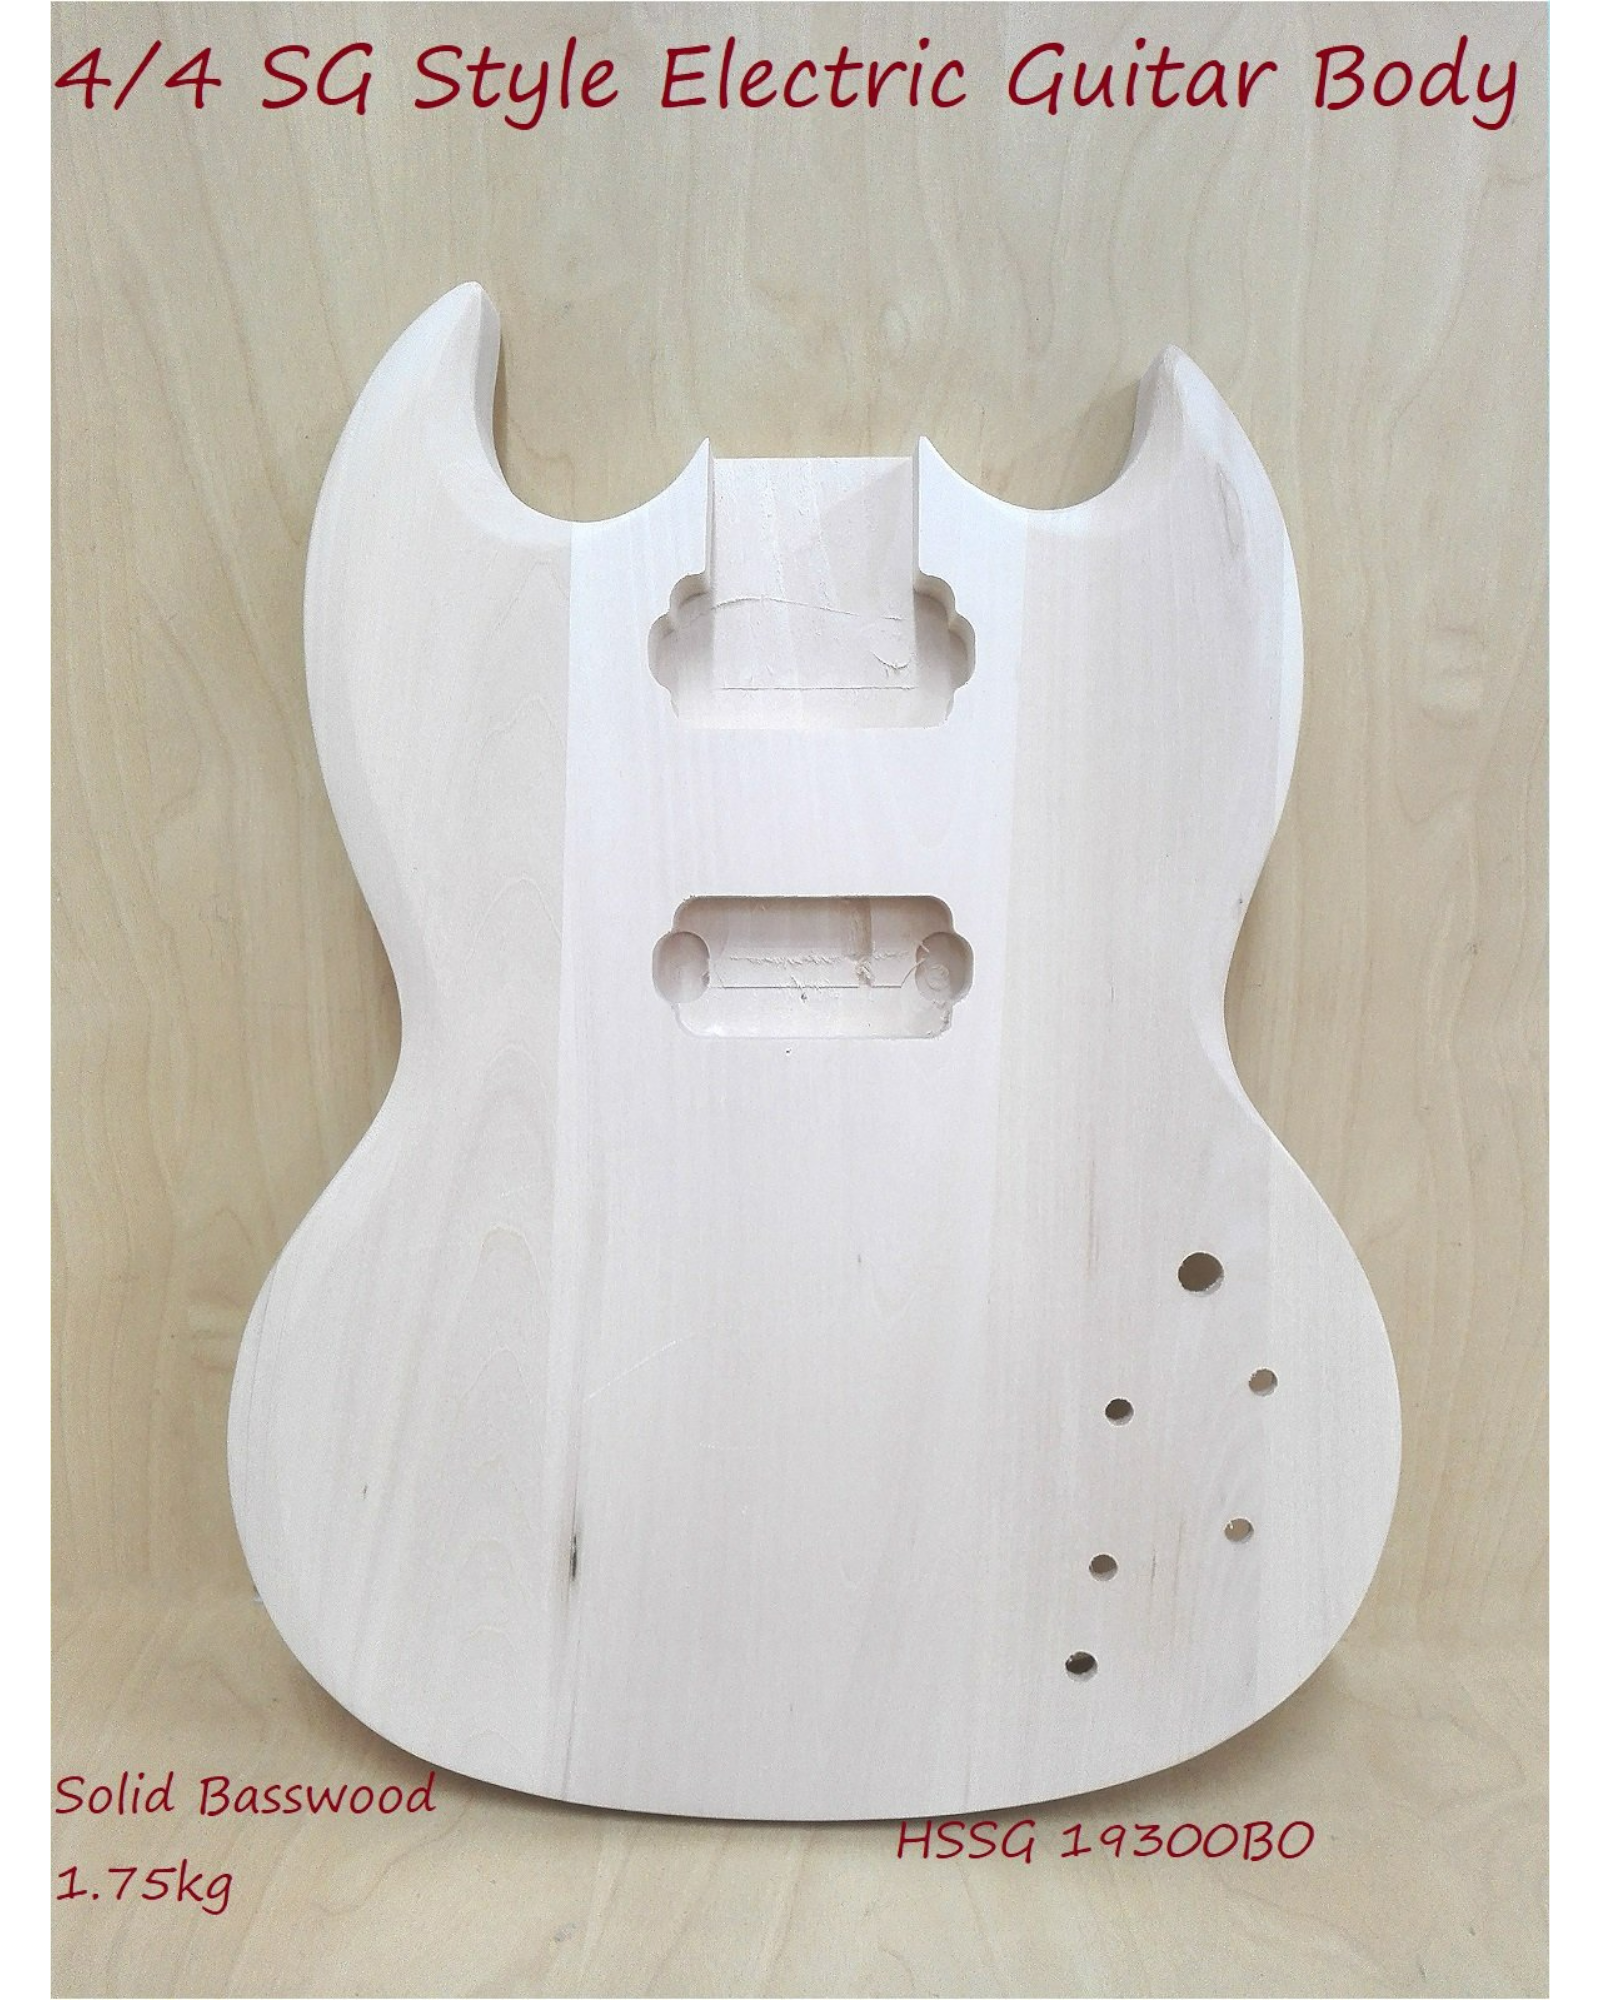 HSSG19300BO Solid Basswood Electric Guitar Body, Pre-Drilled, Polished